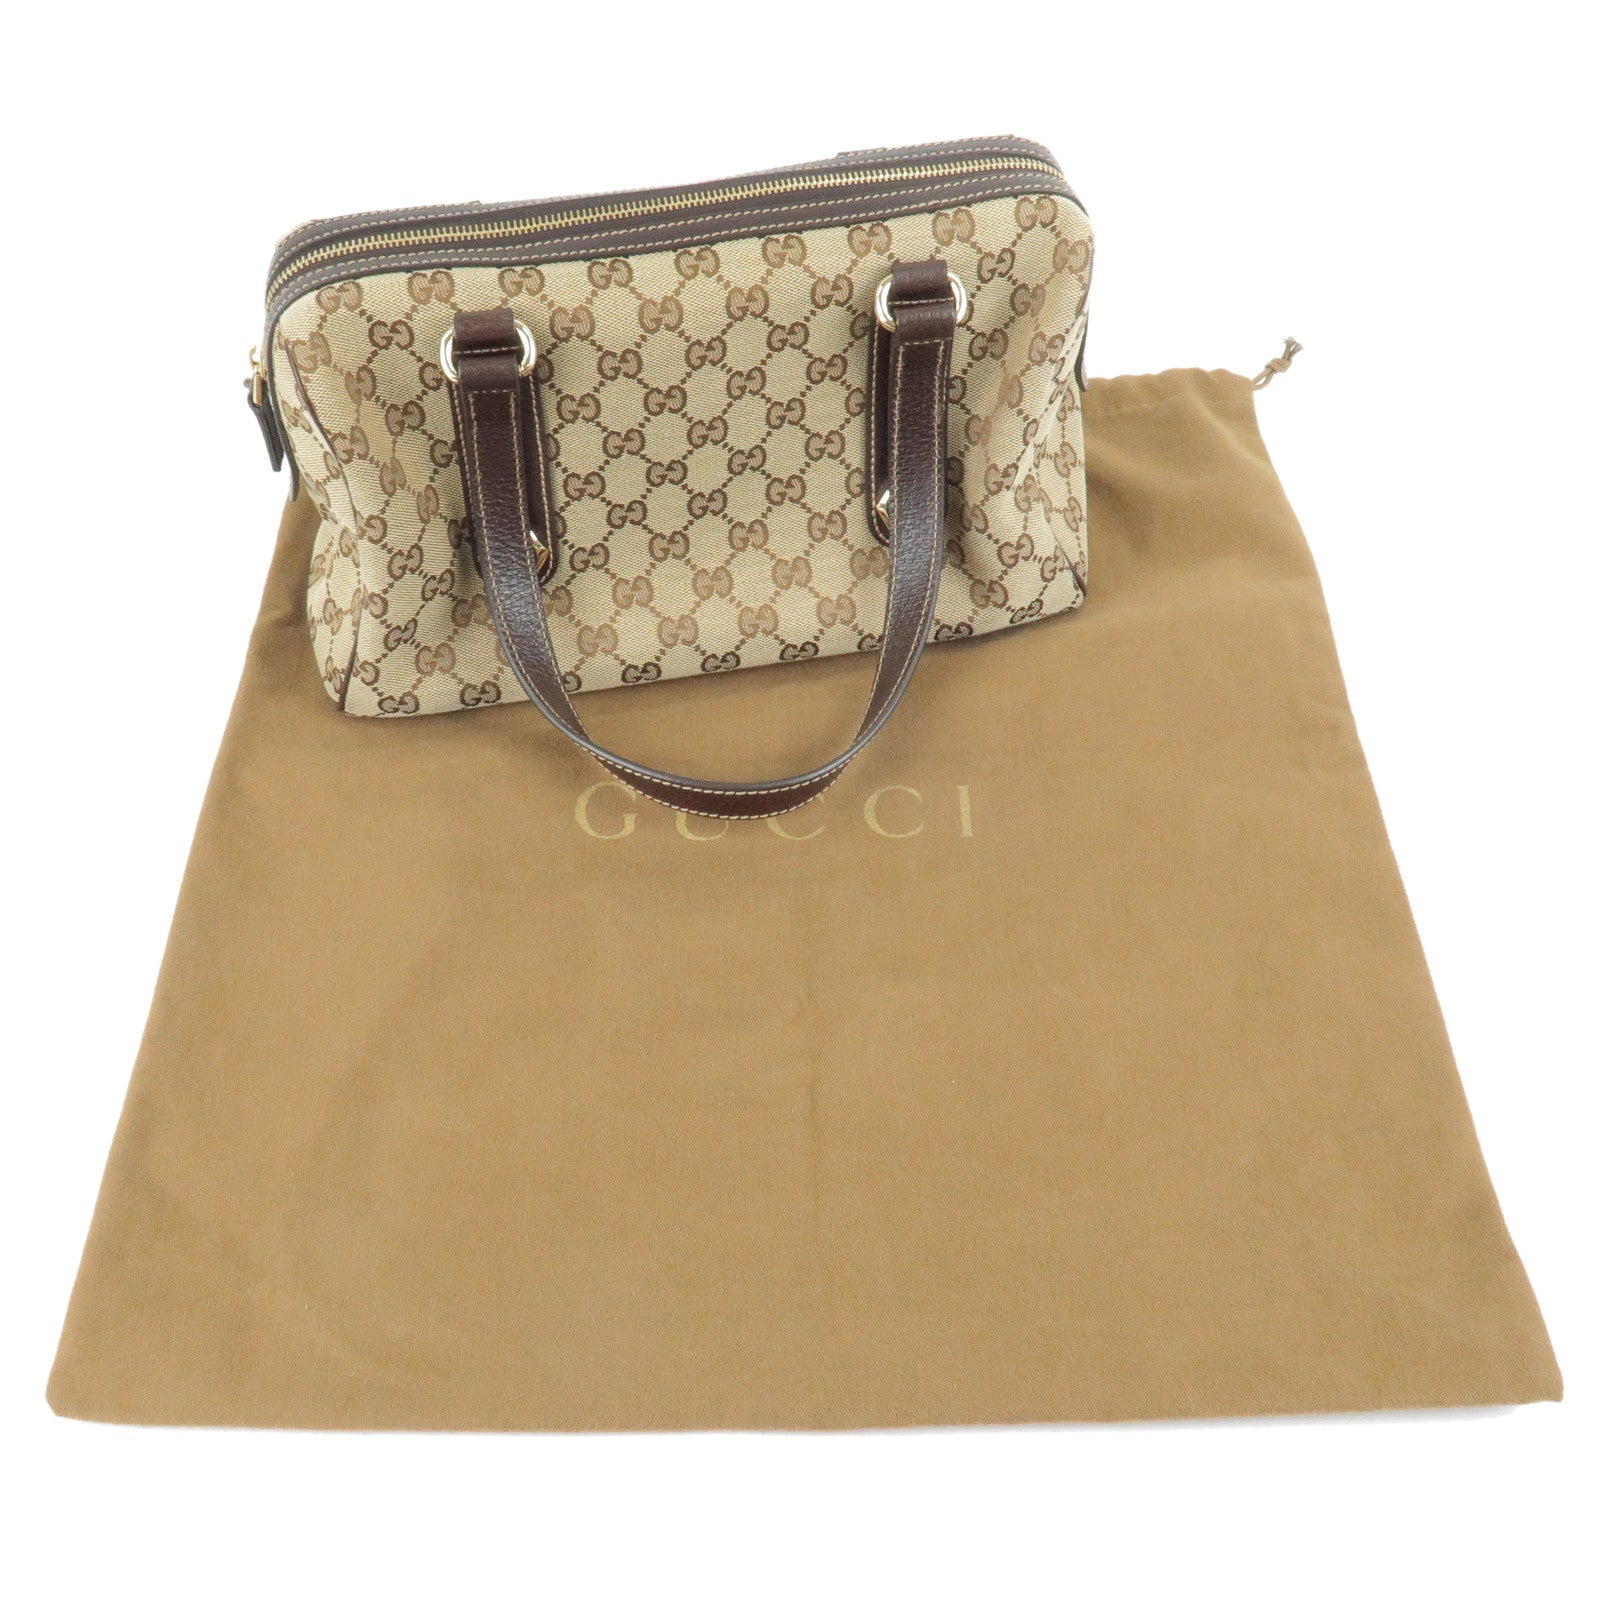 GG - Leather - Brown - 152457 – dct - ep_vintage luxury Store - Canvas -  Gucci Horsebit-detail loafers Braun - Boston - Beige - Bag - GUCCI